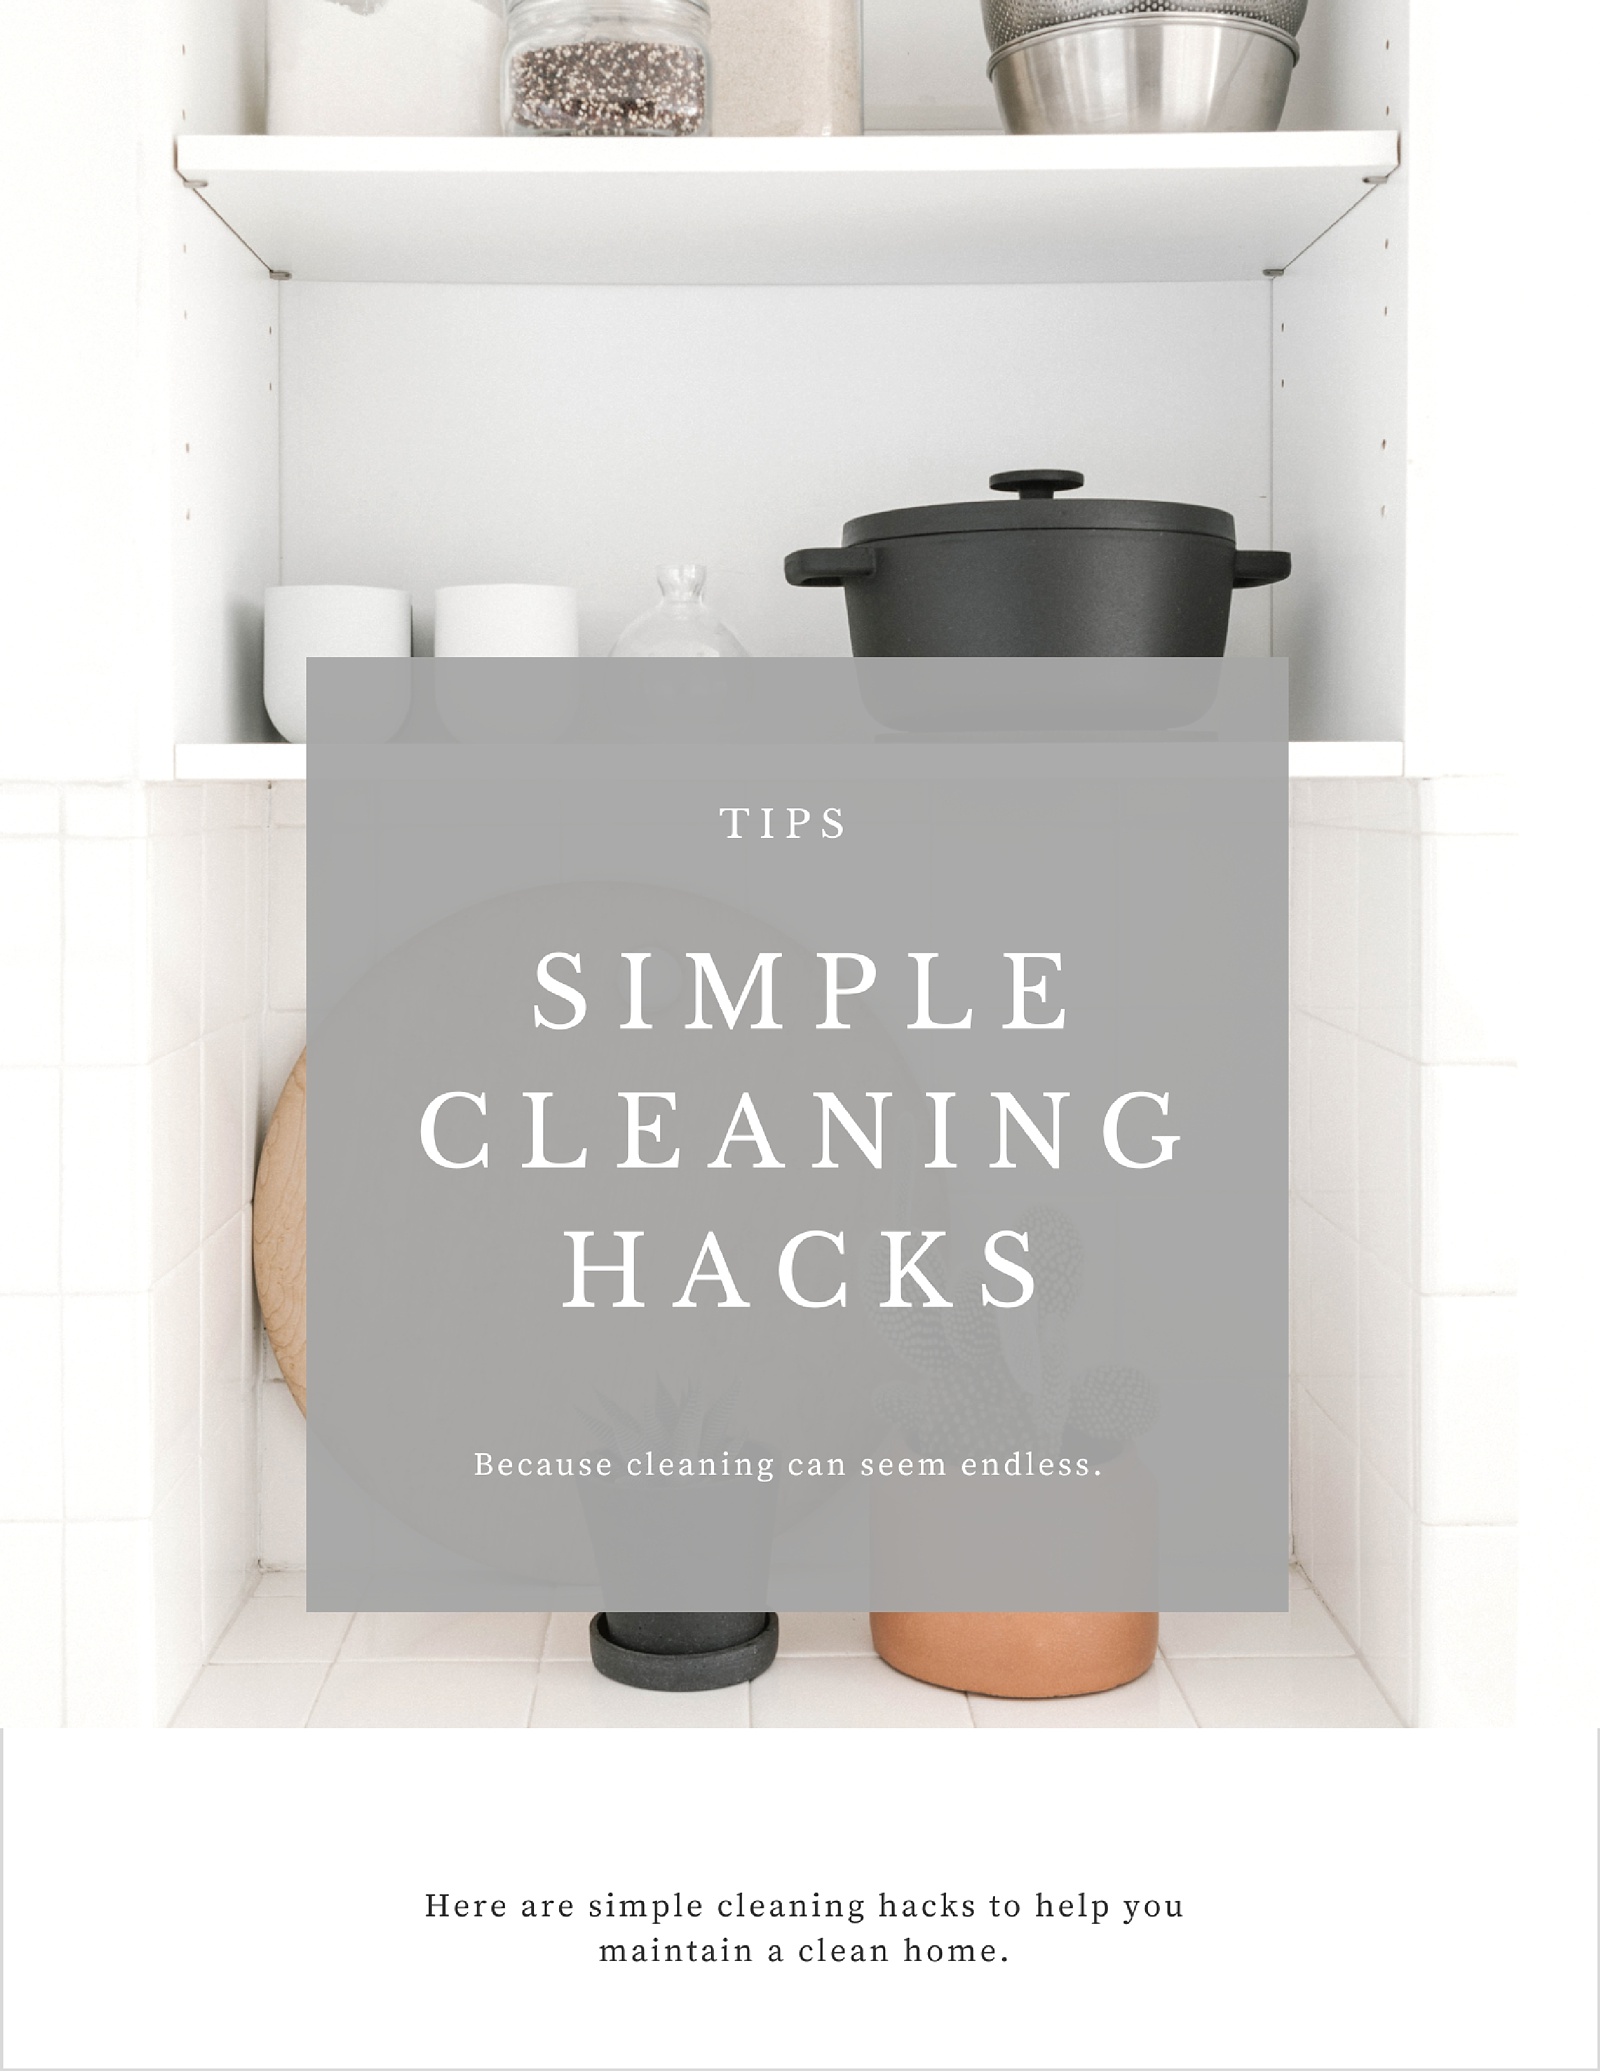 10 Simple Cleaning Hacks for Your Home